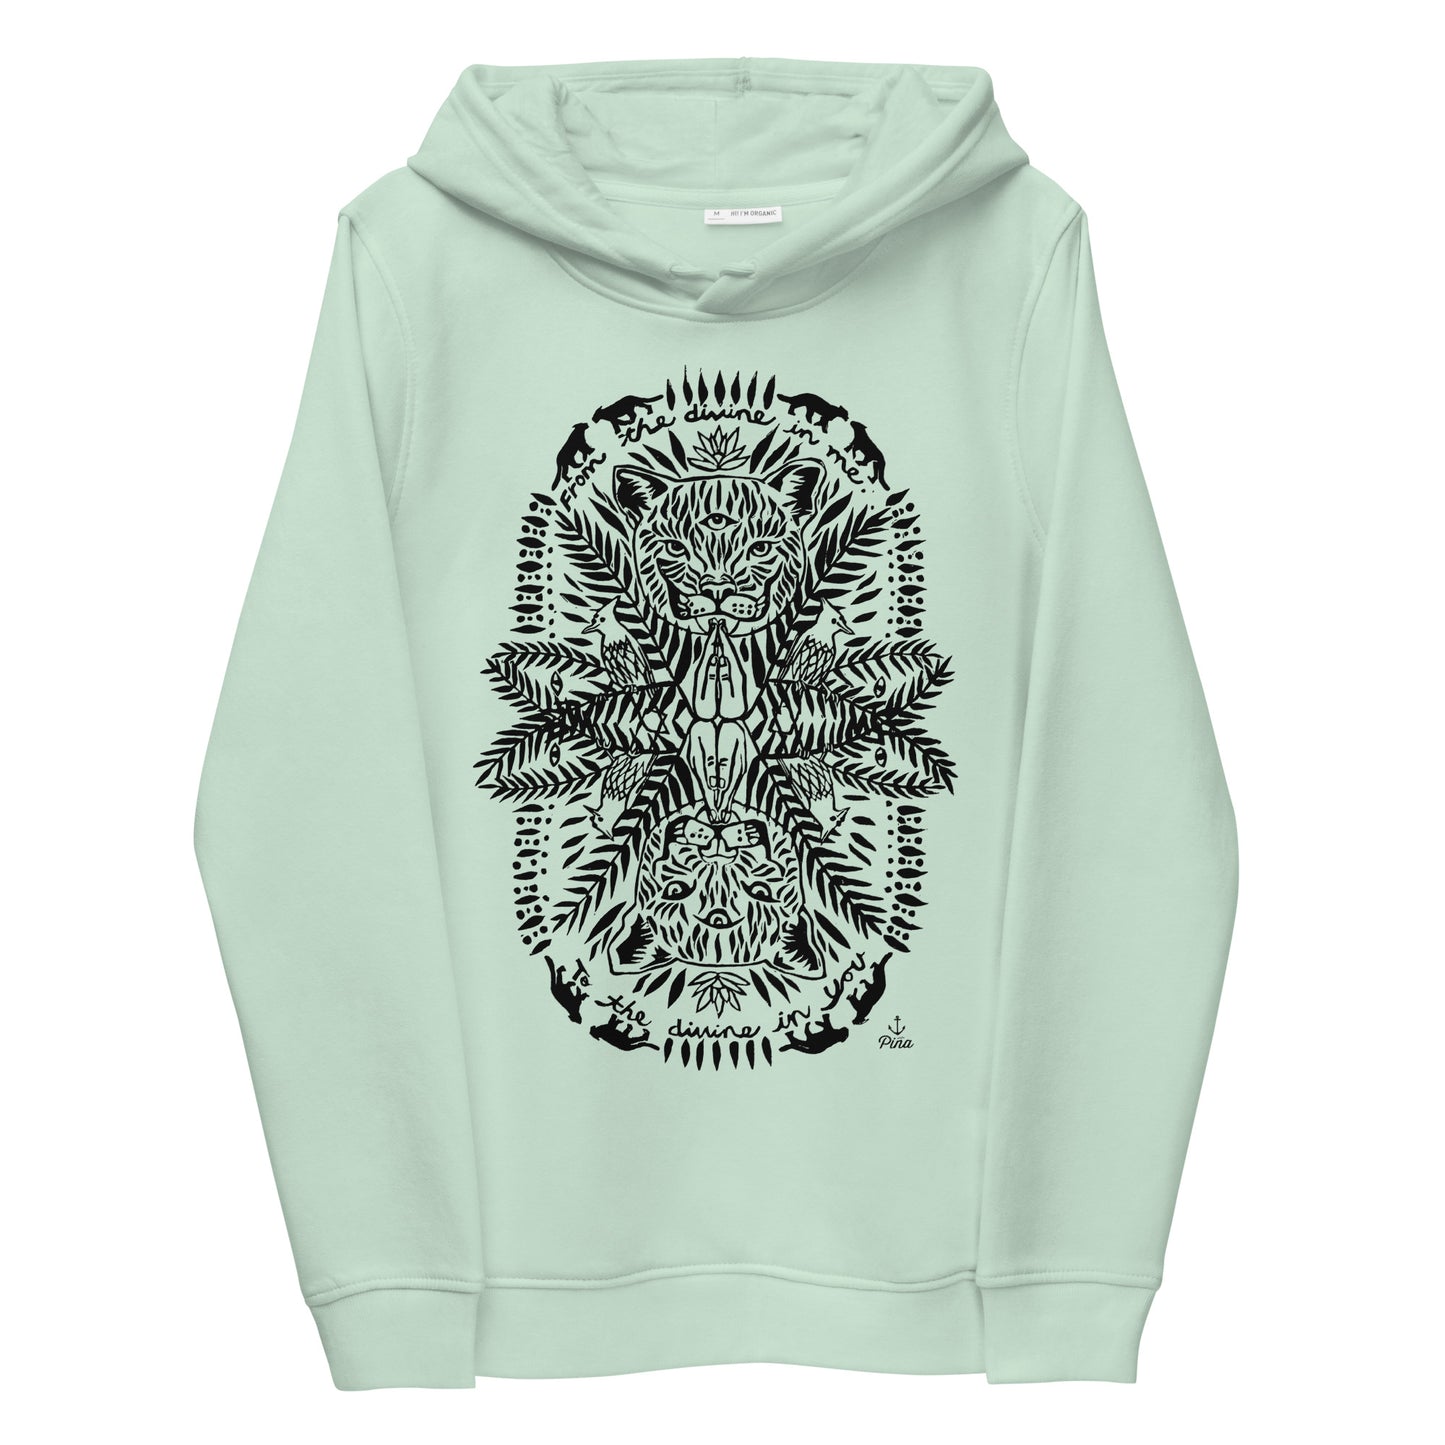 From the Divine in Me Ladies Eco Fitted Hoodie